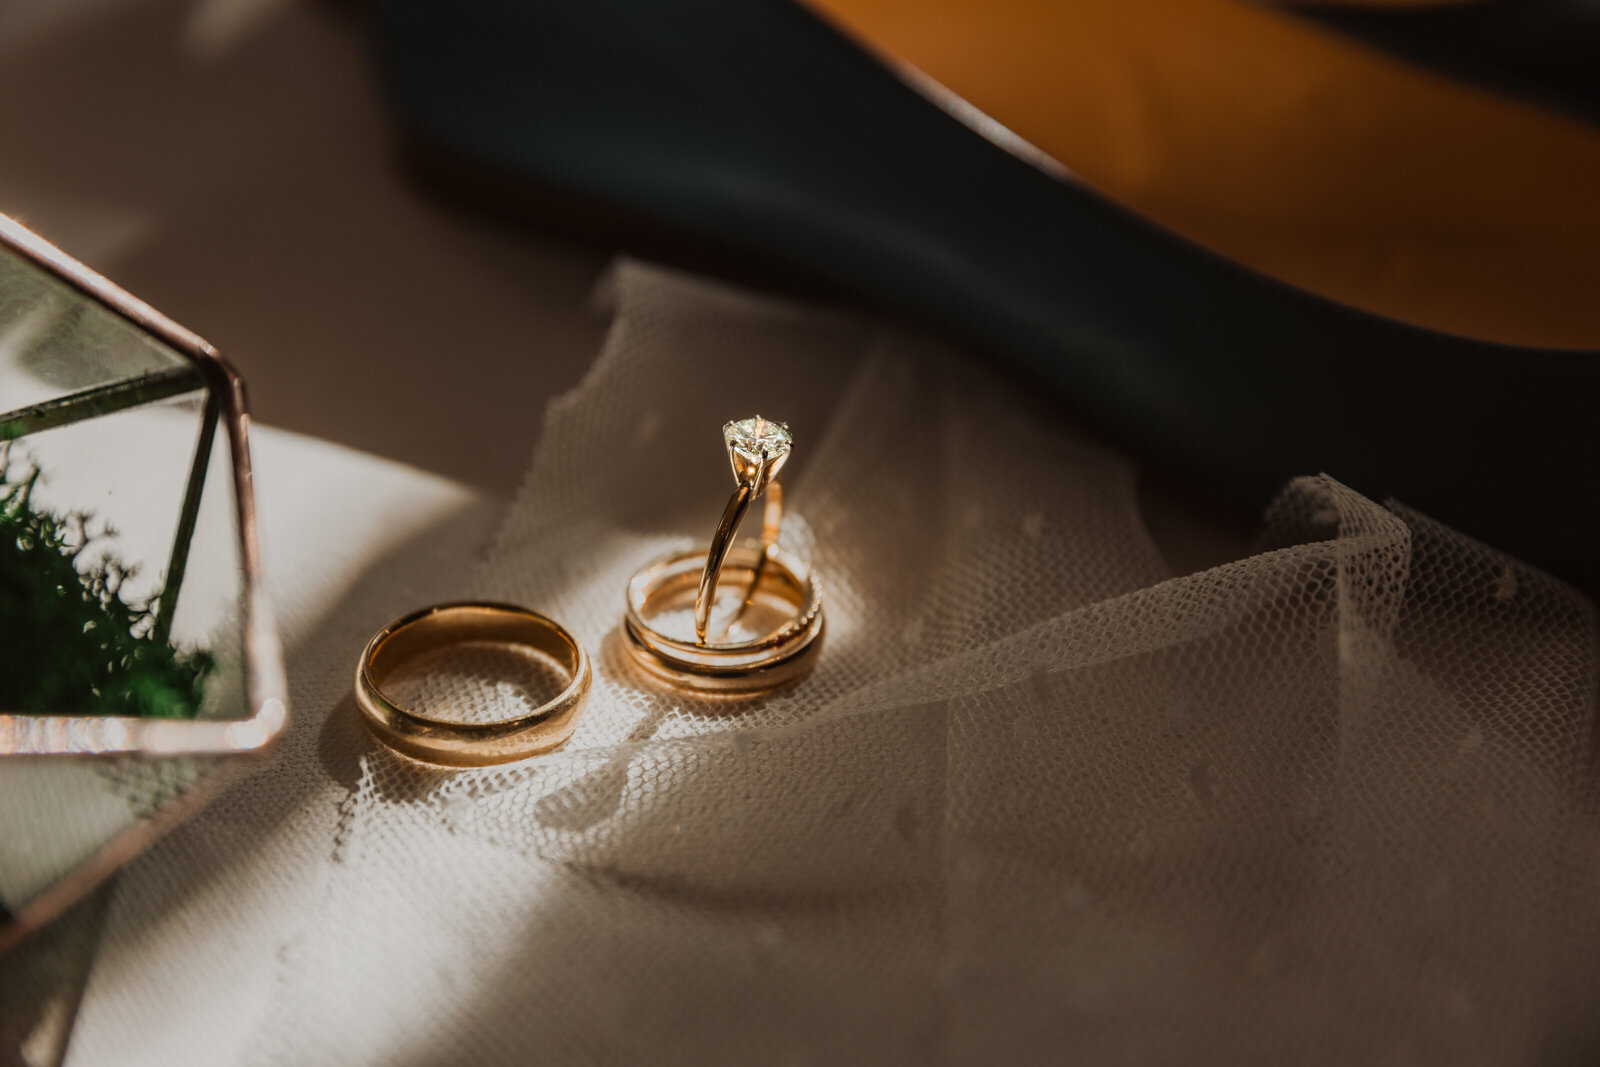 Atlanta wedding photographer highlighting unique wedding rings for modern couples. Explore unconventional shapes, textures, & gemstones